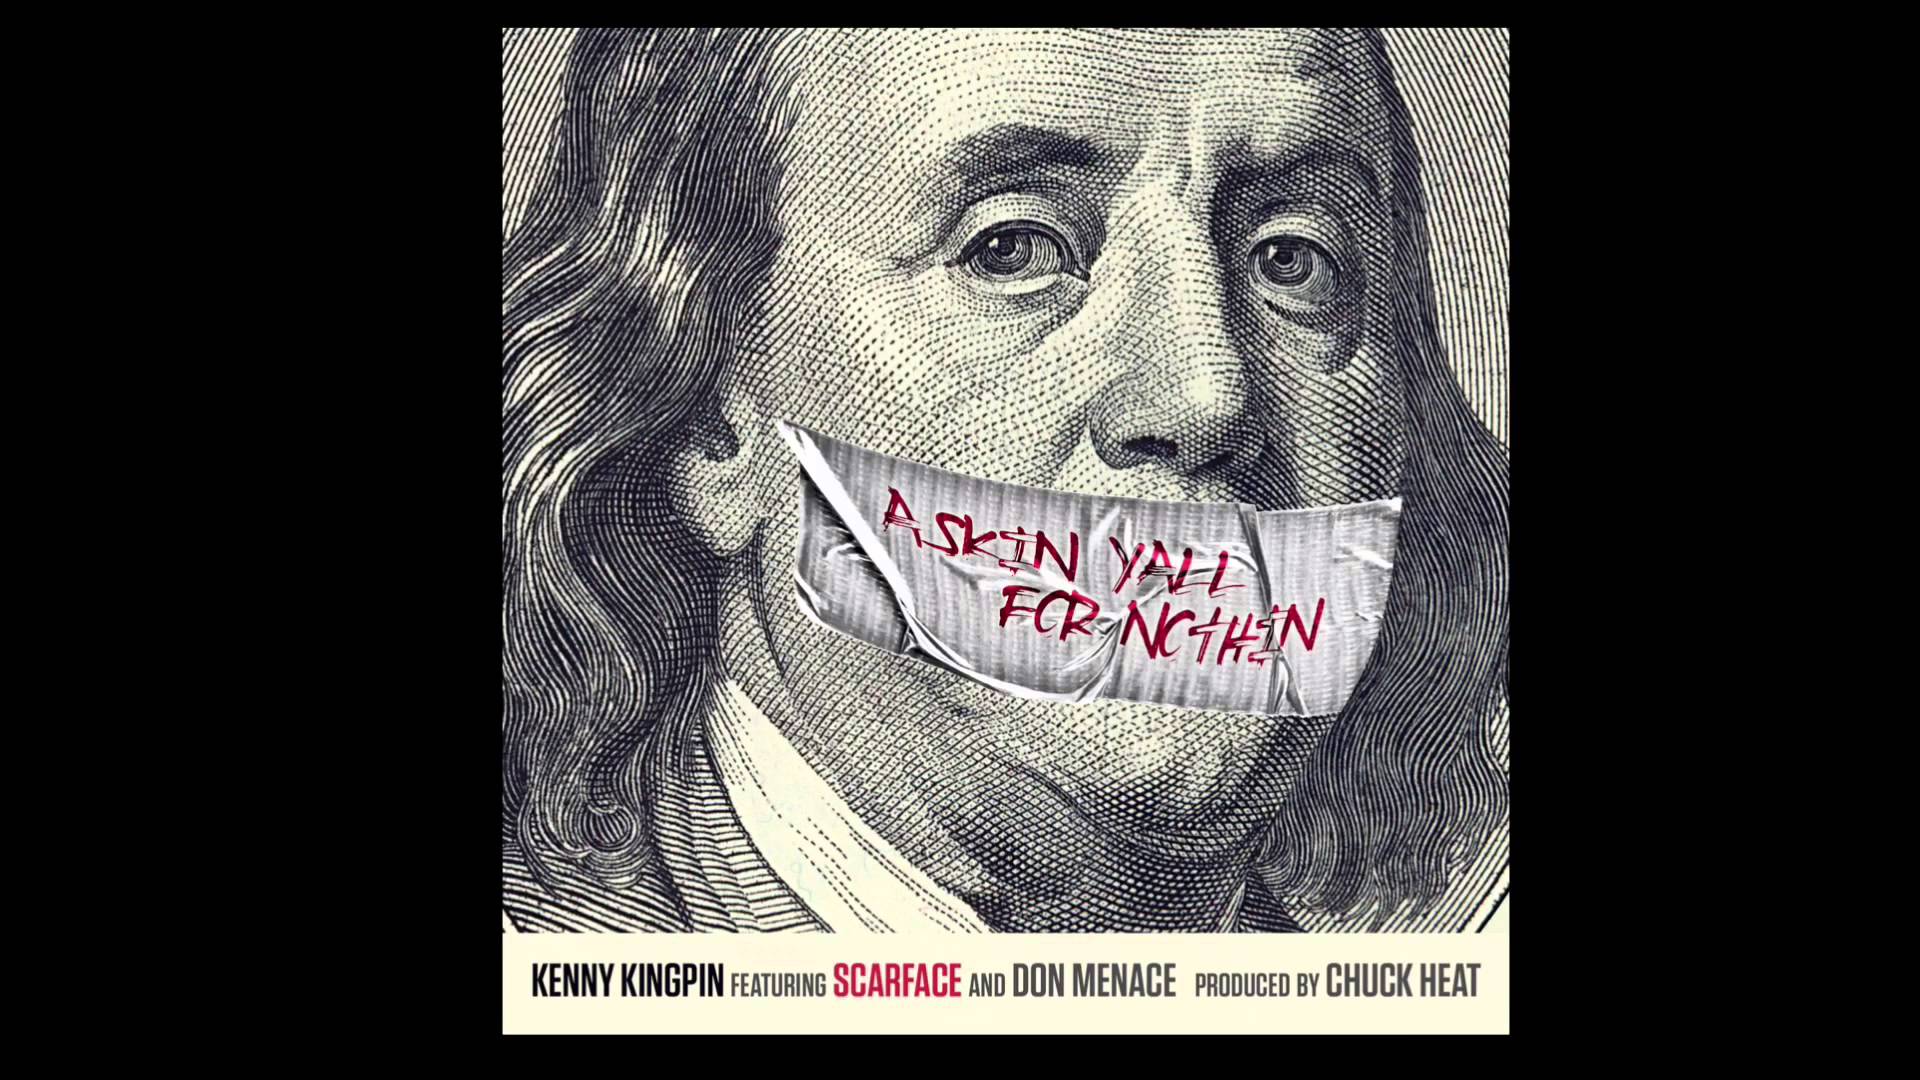 Kenny Kingpin Askin Y'all For Nothin Feat. Scarface & Don Menace